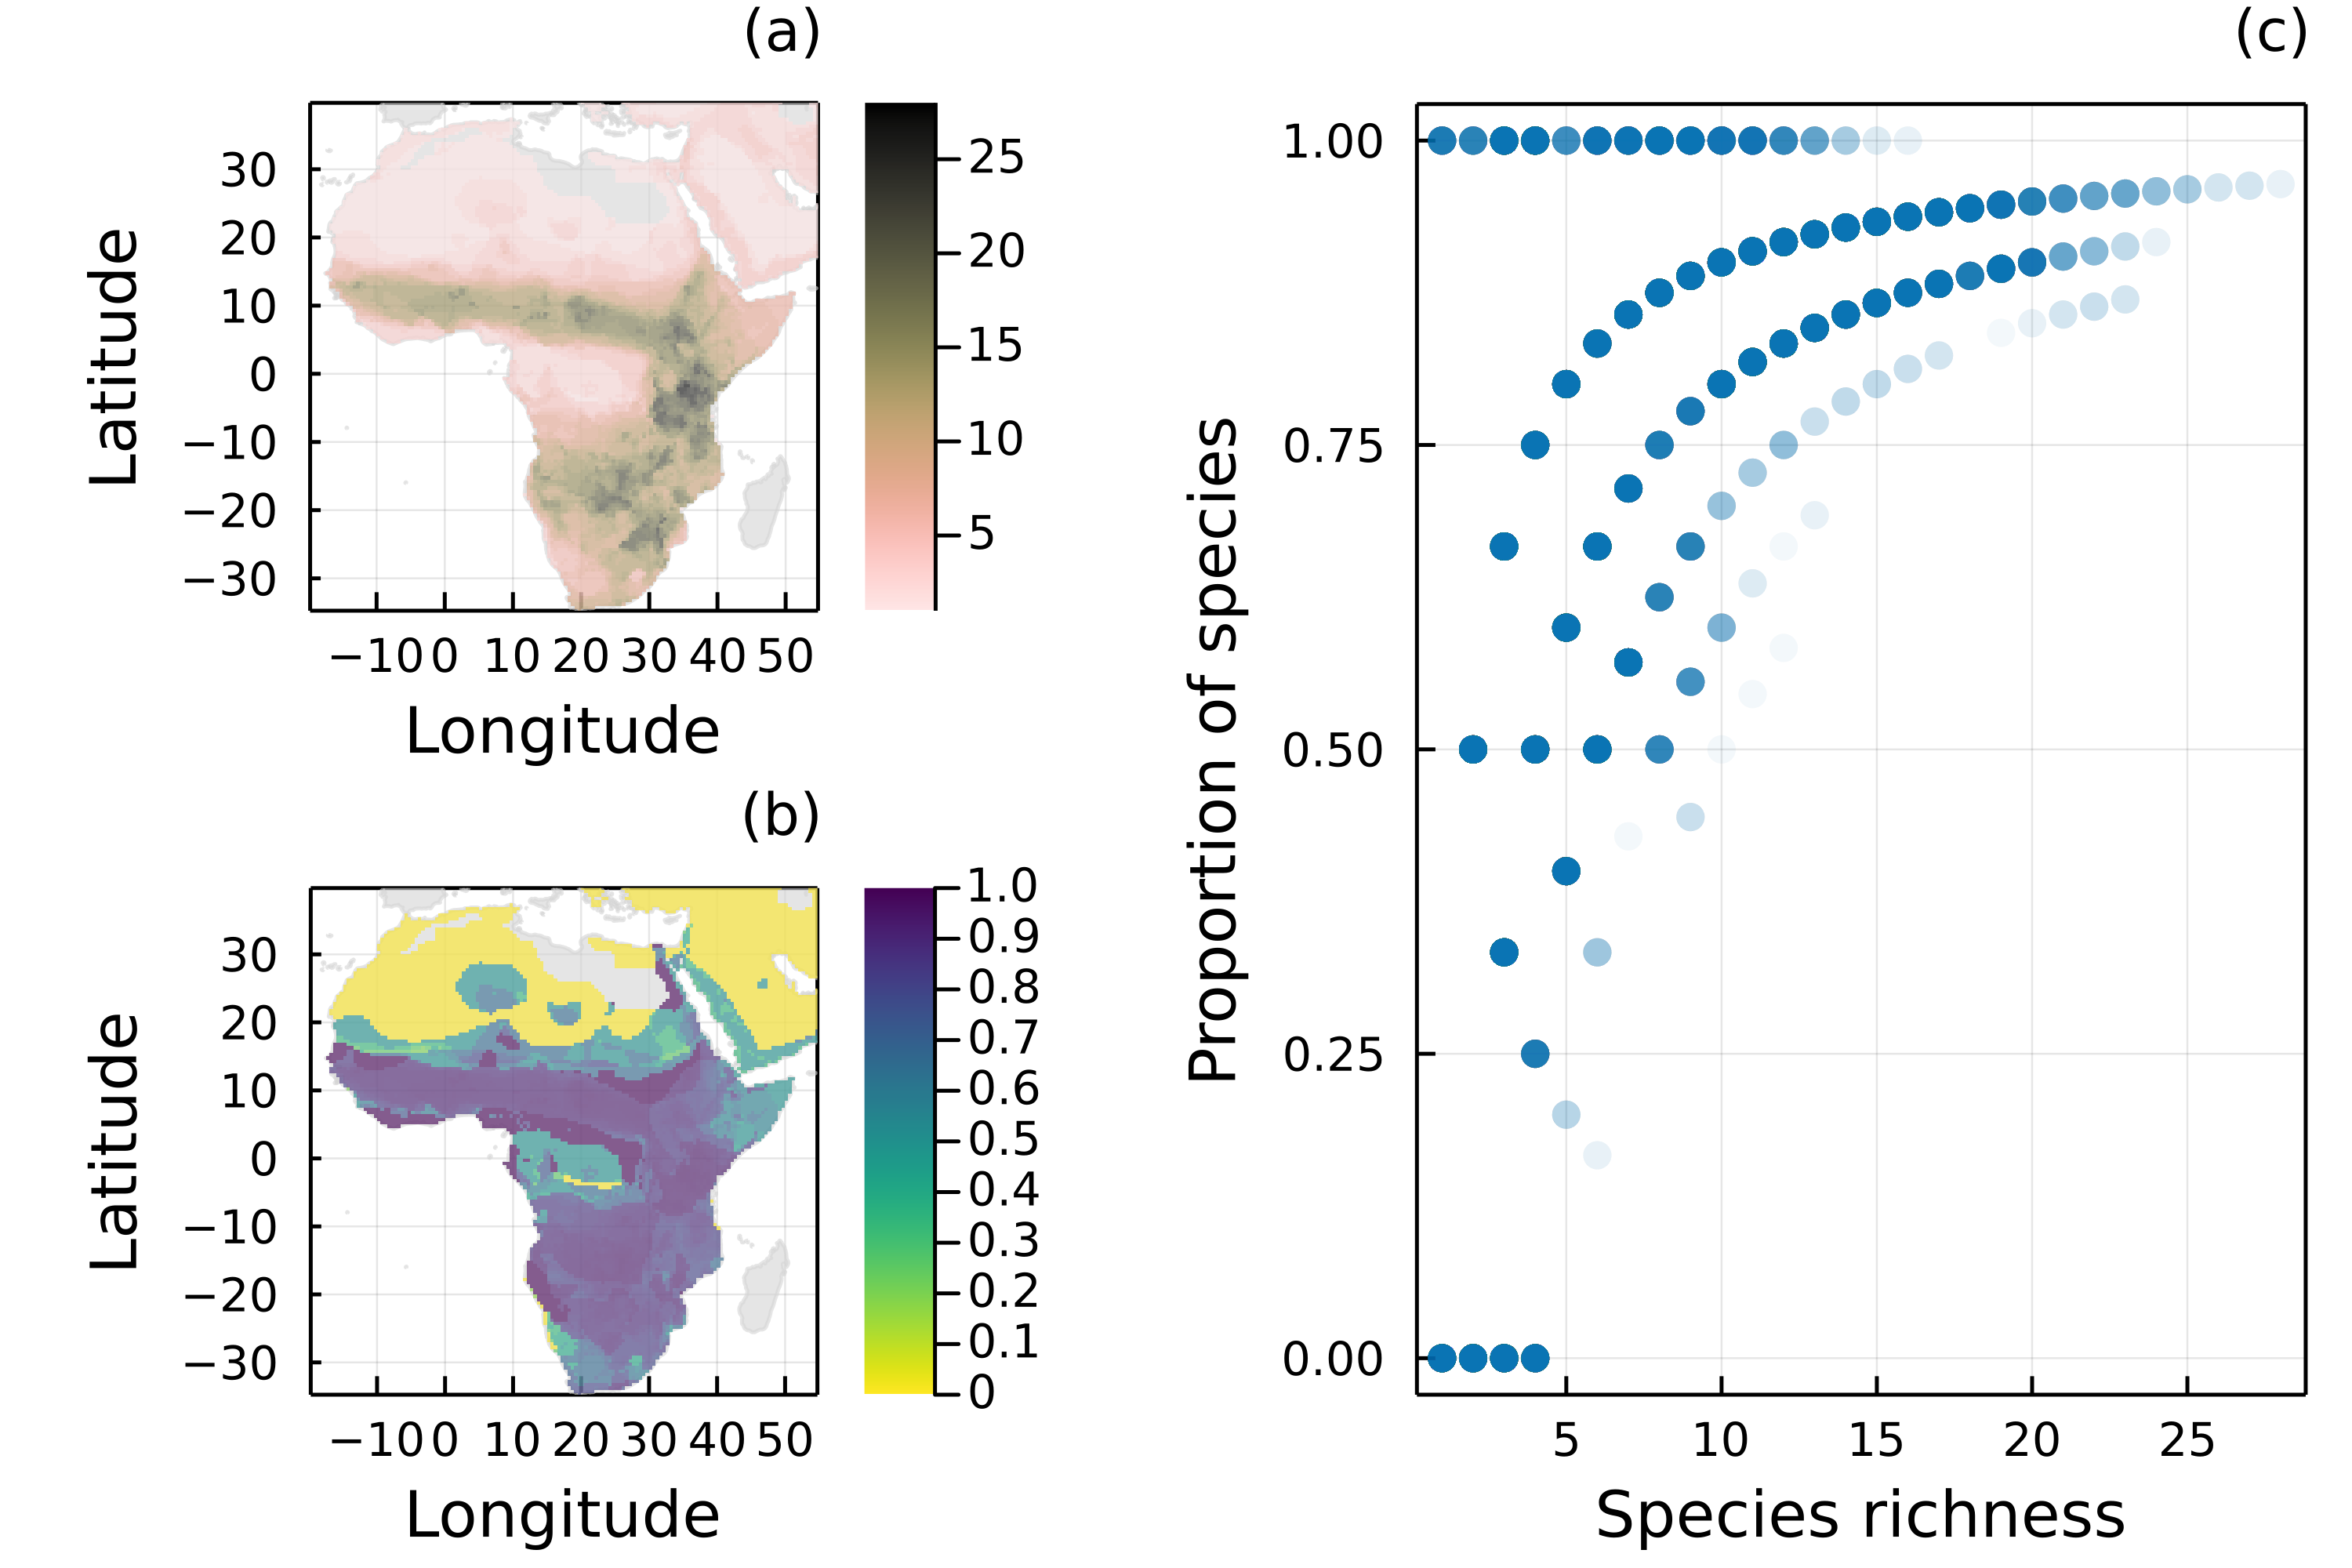 Figure 1: (a) Spatial distribution of species richness according to the original IUCN range maps of all 32 mammal species of the Serengeti food web. (b) Proportion of mammal species remaining in each local network (i.e., each pixel) after removing all species without a path to a primary producer. (c) Proportion of mammal species remaining in each local network as a function of the number of species given by the original IUCN range maps.